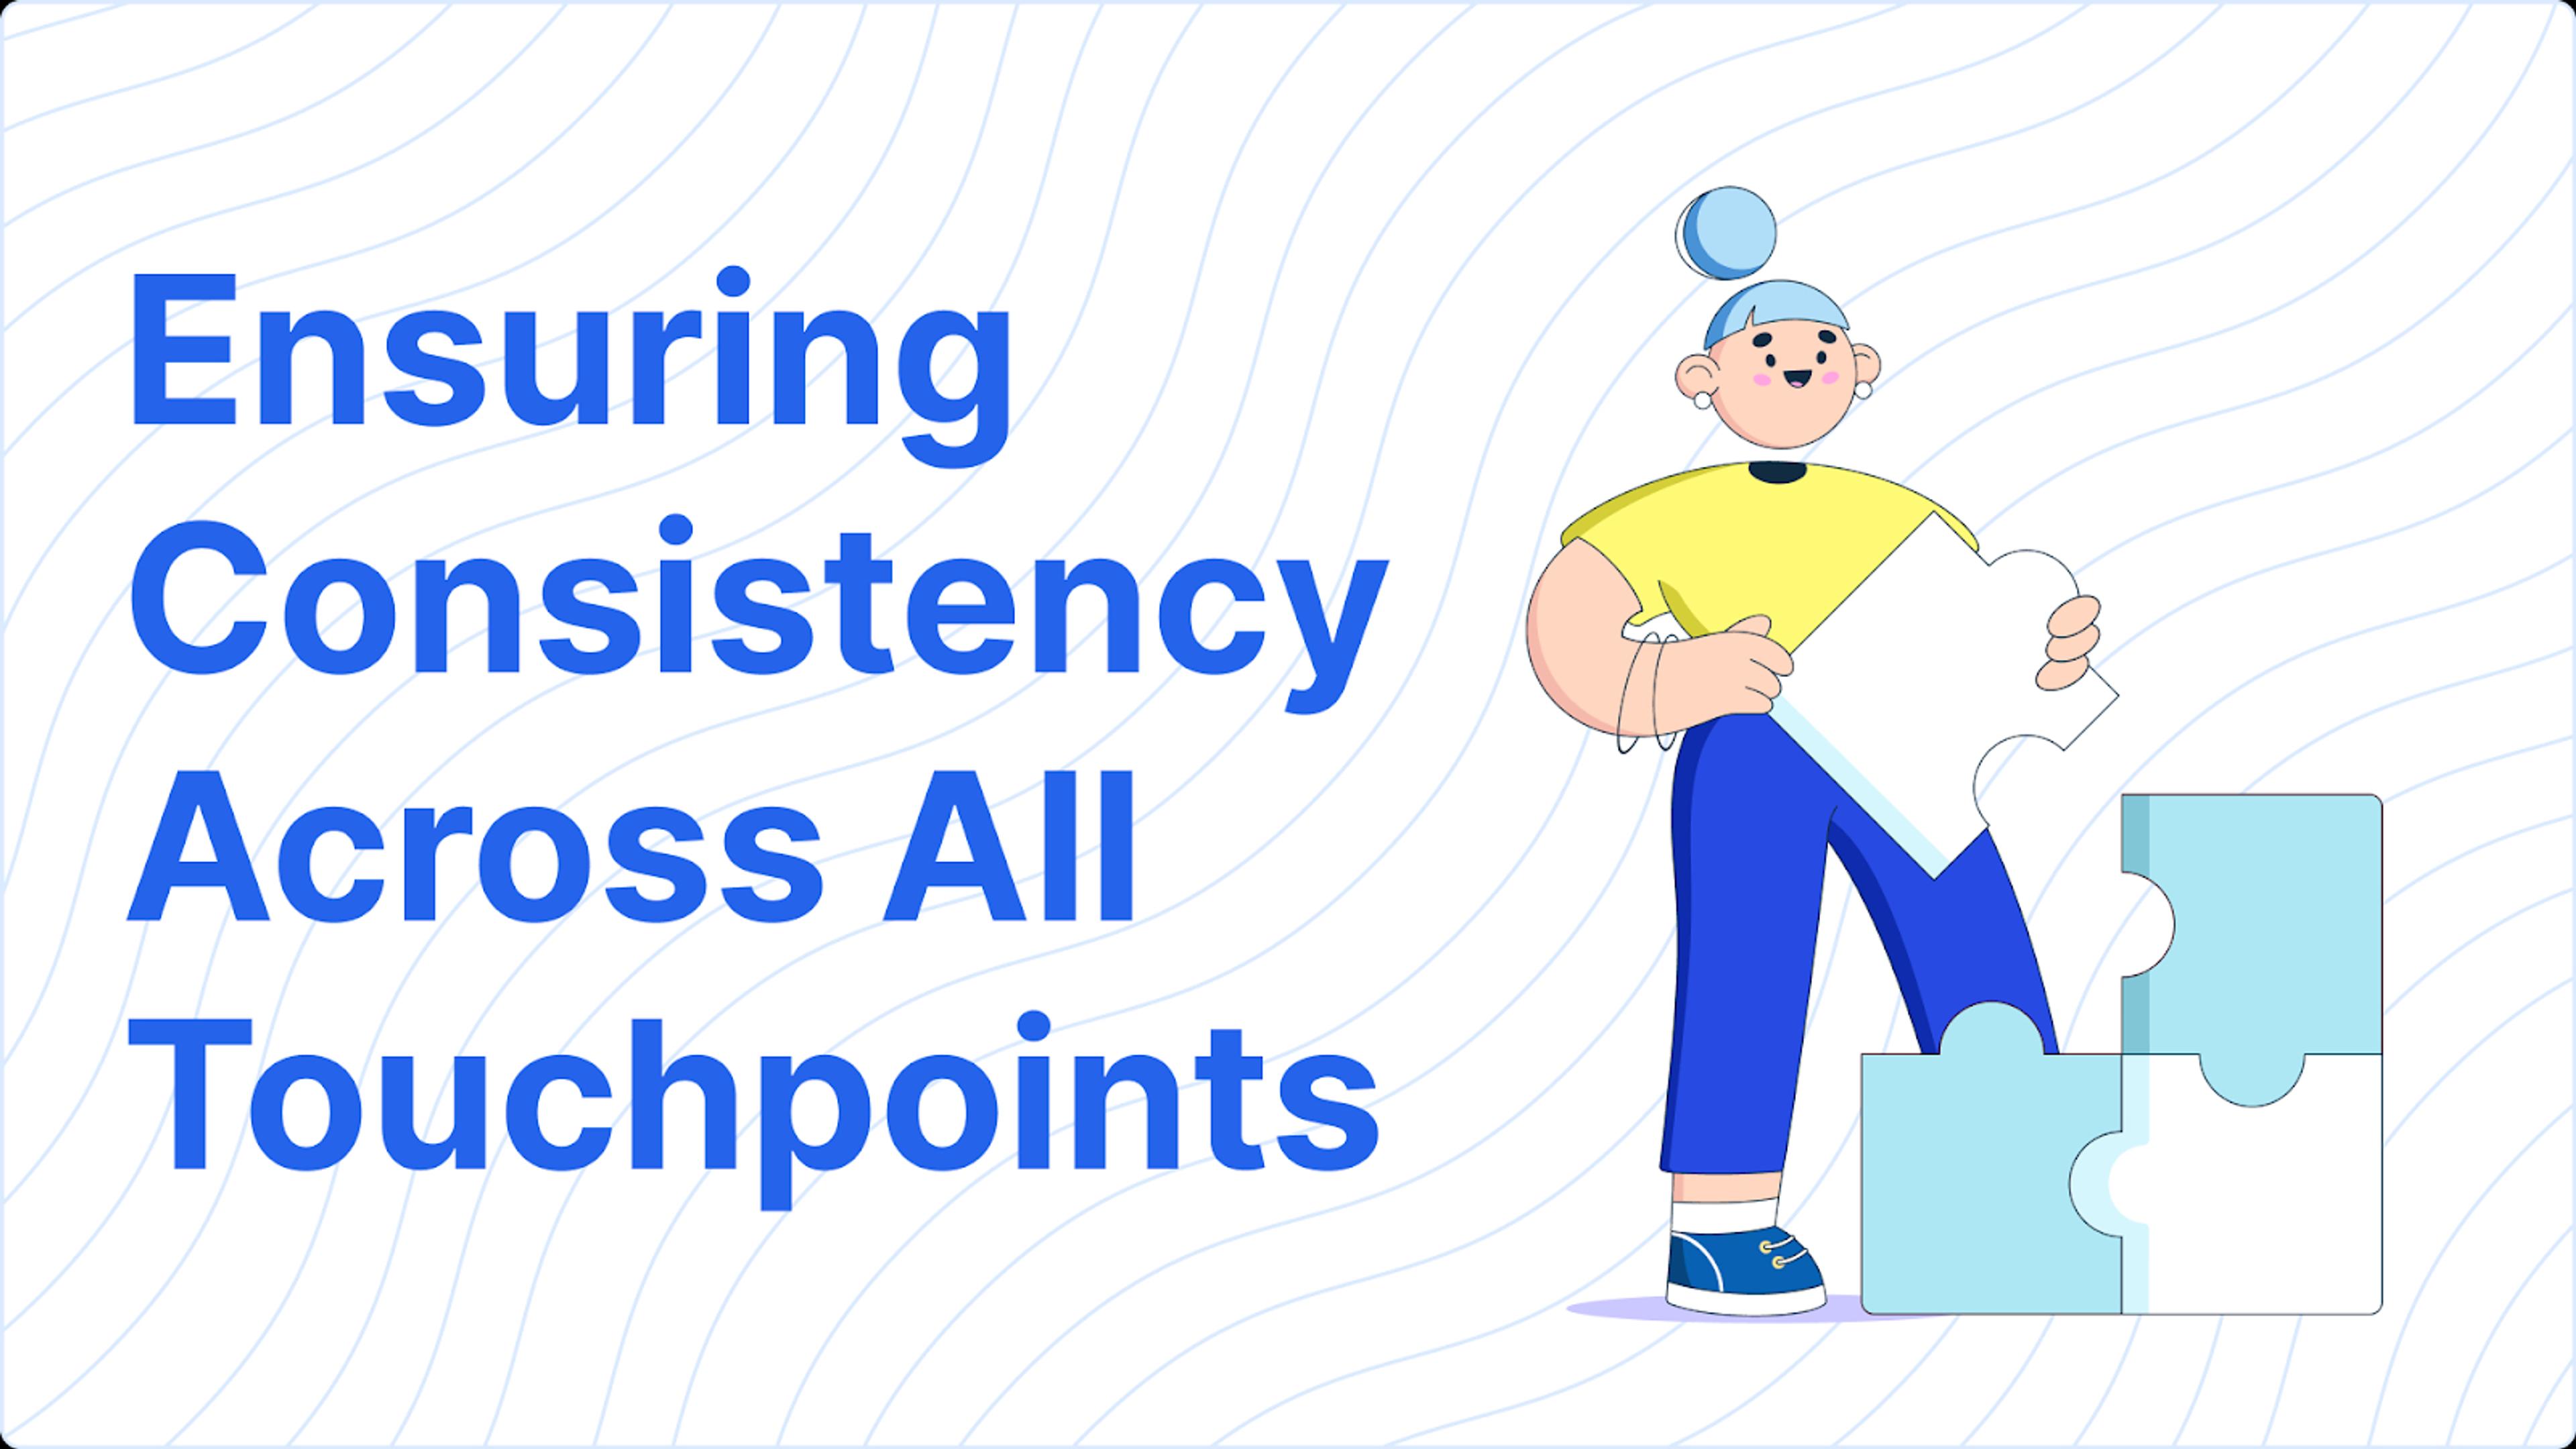 Ensuring Consistency Across All Touchpoints